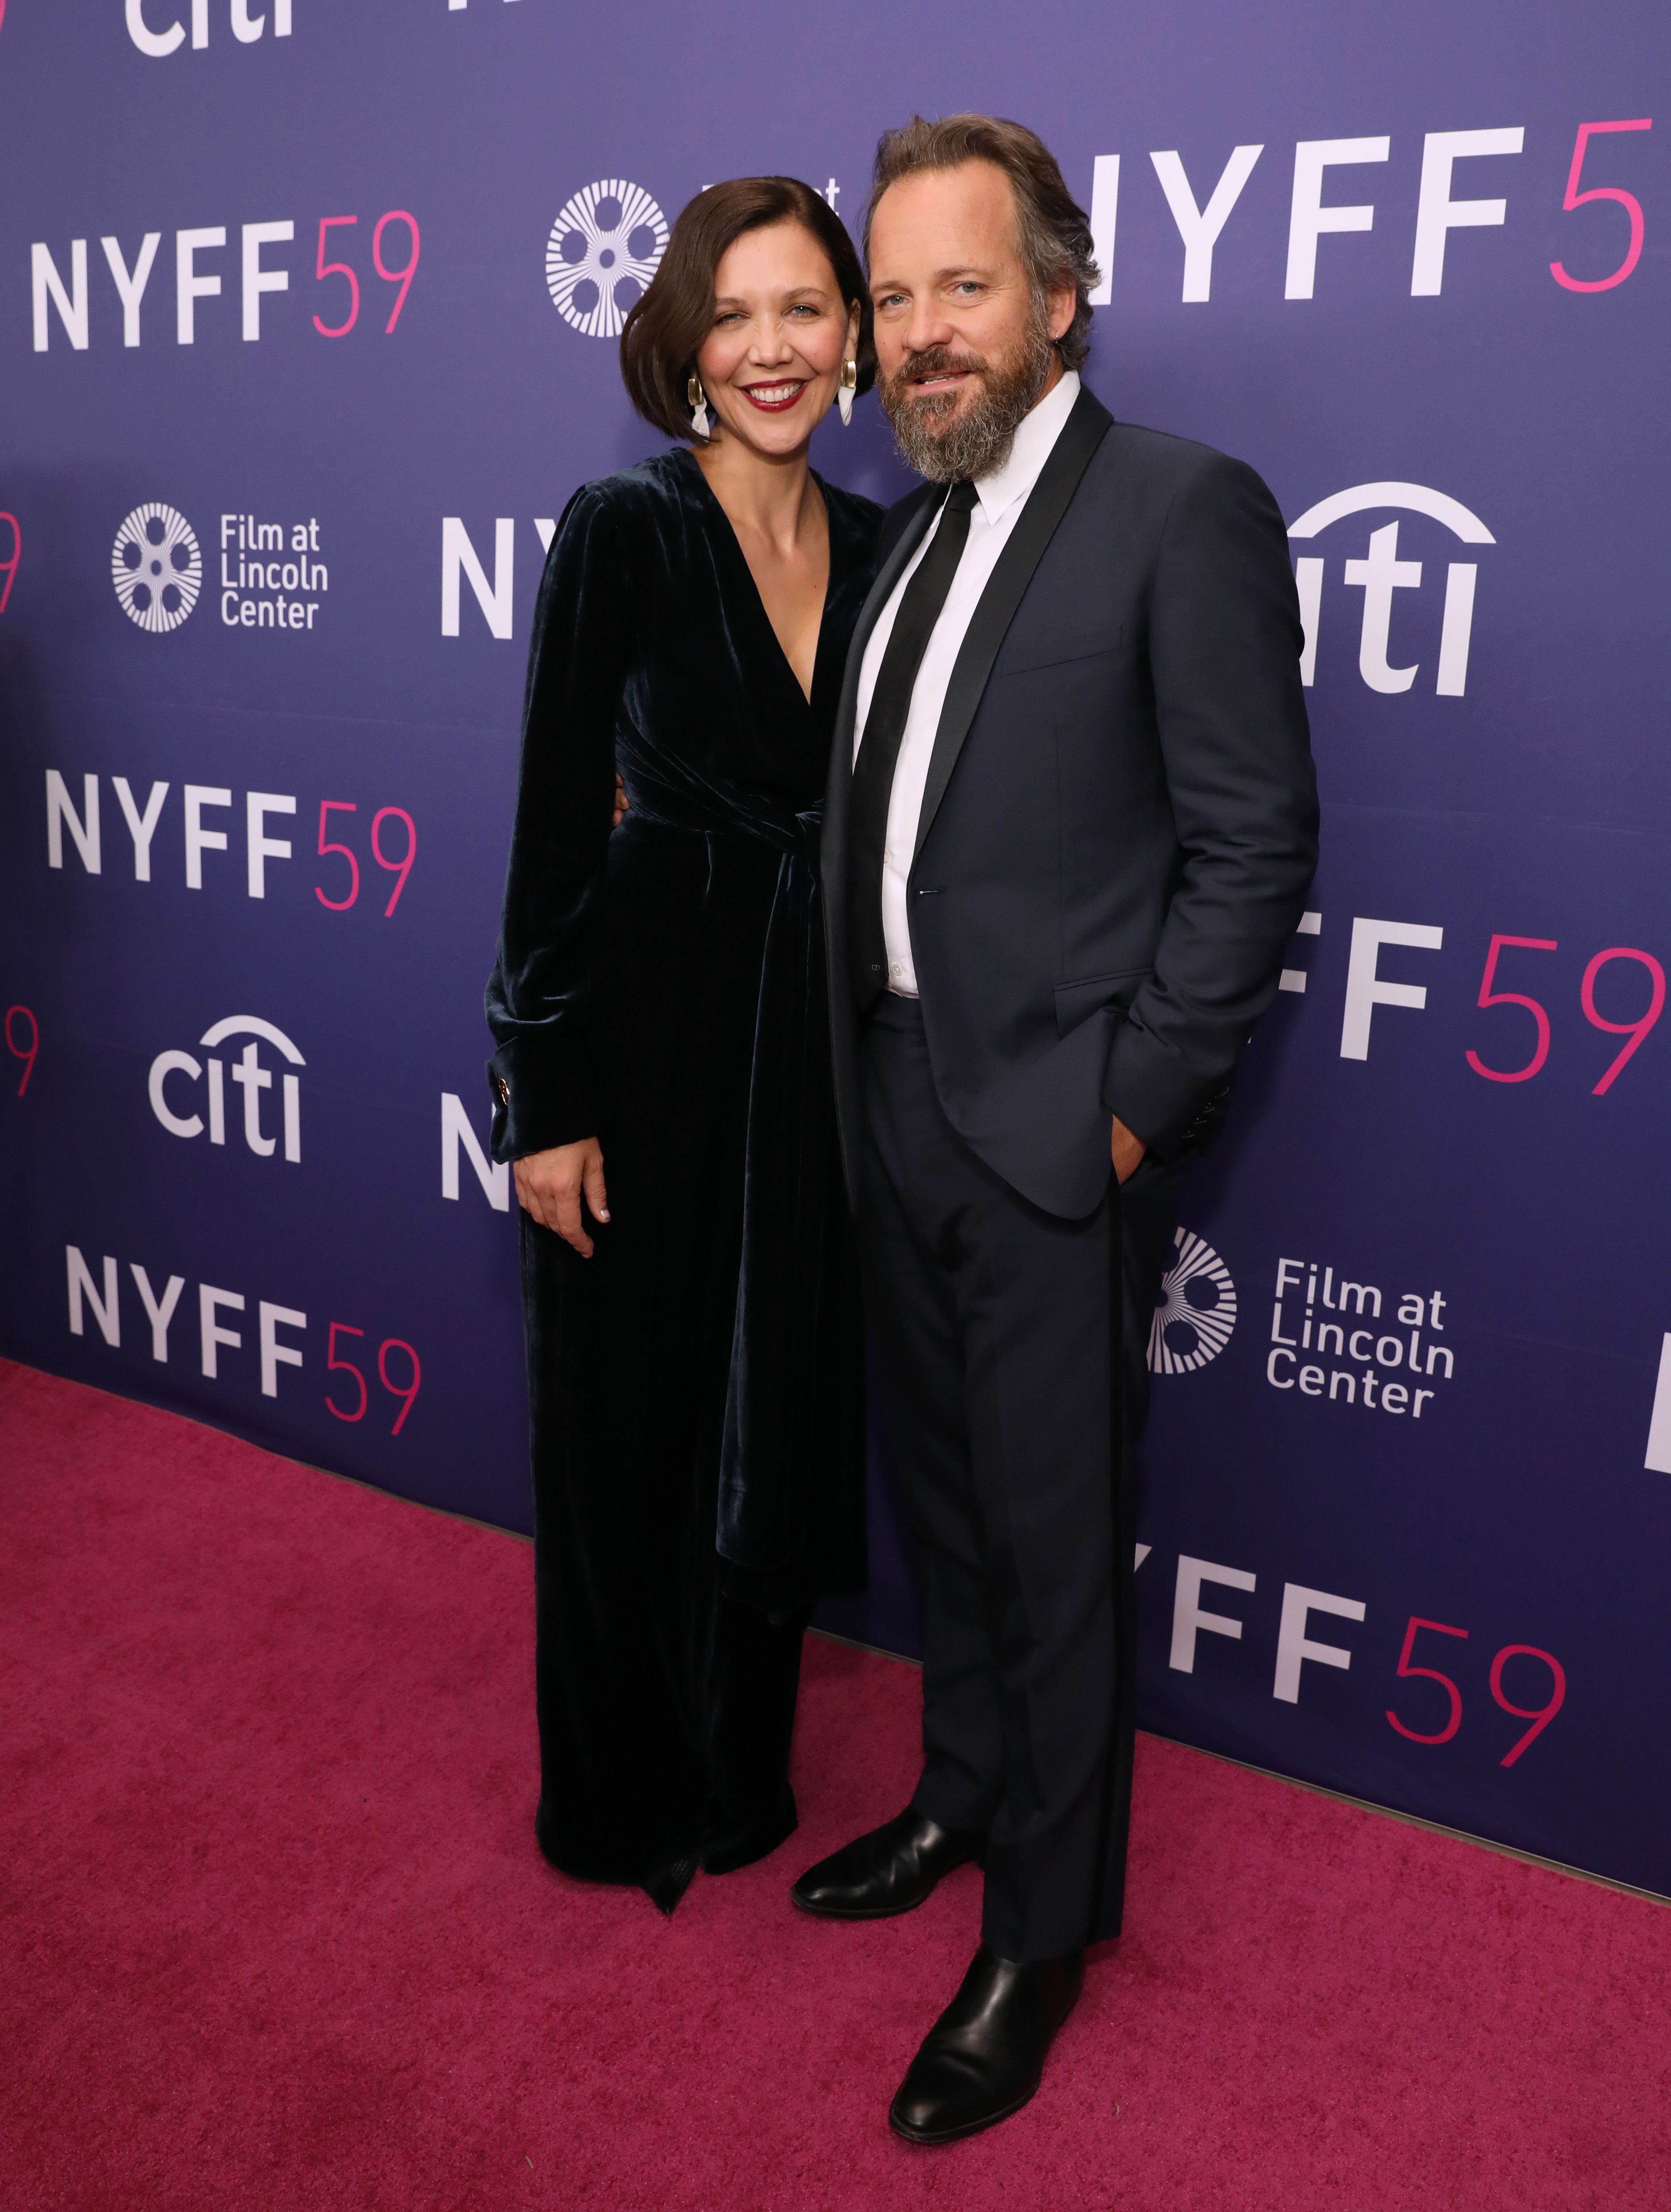 Maggie Gyllenhaal and Peter Sarsgaard pictured at the screening of Netflix's "The Lost Daughter." 2021, New York City. | Photo: Getty Images